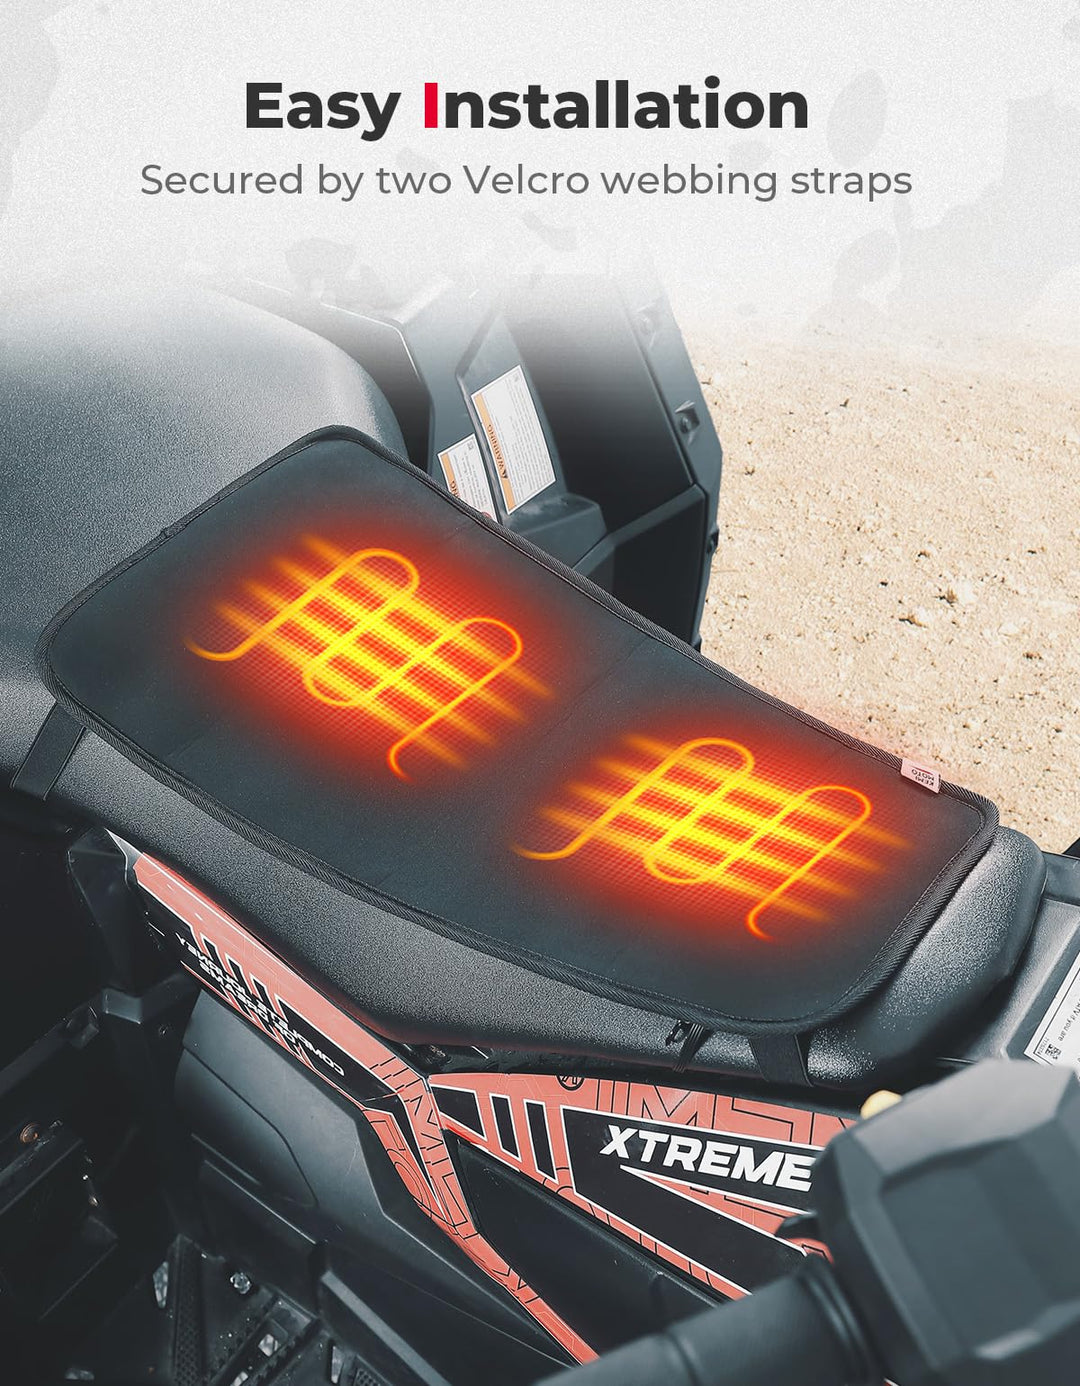 Heated Seat Pad Kit for Motorcycles